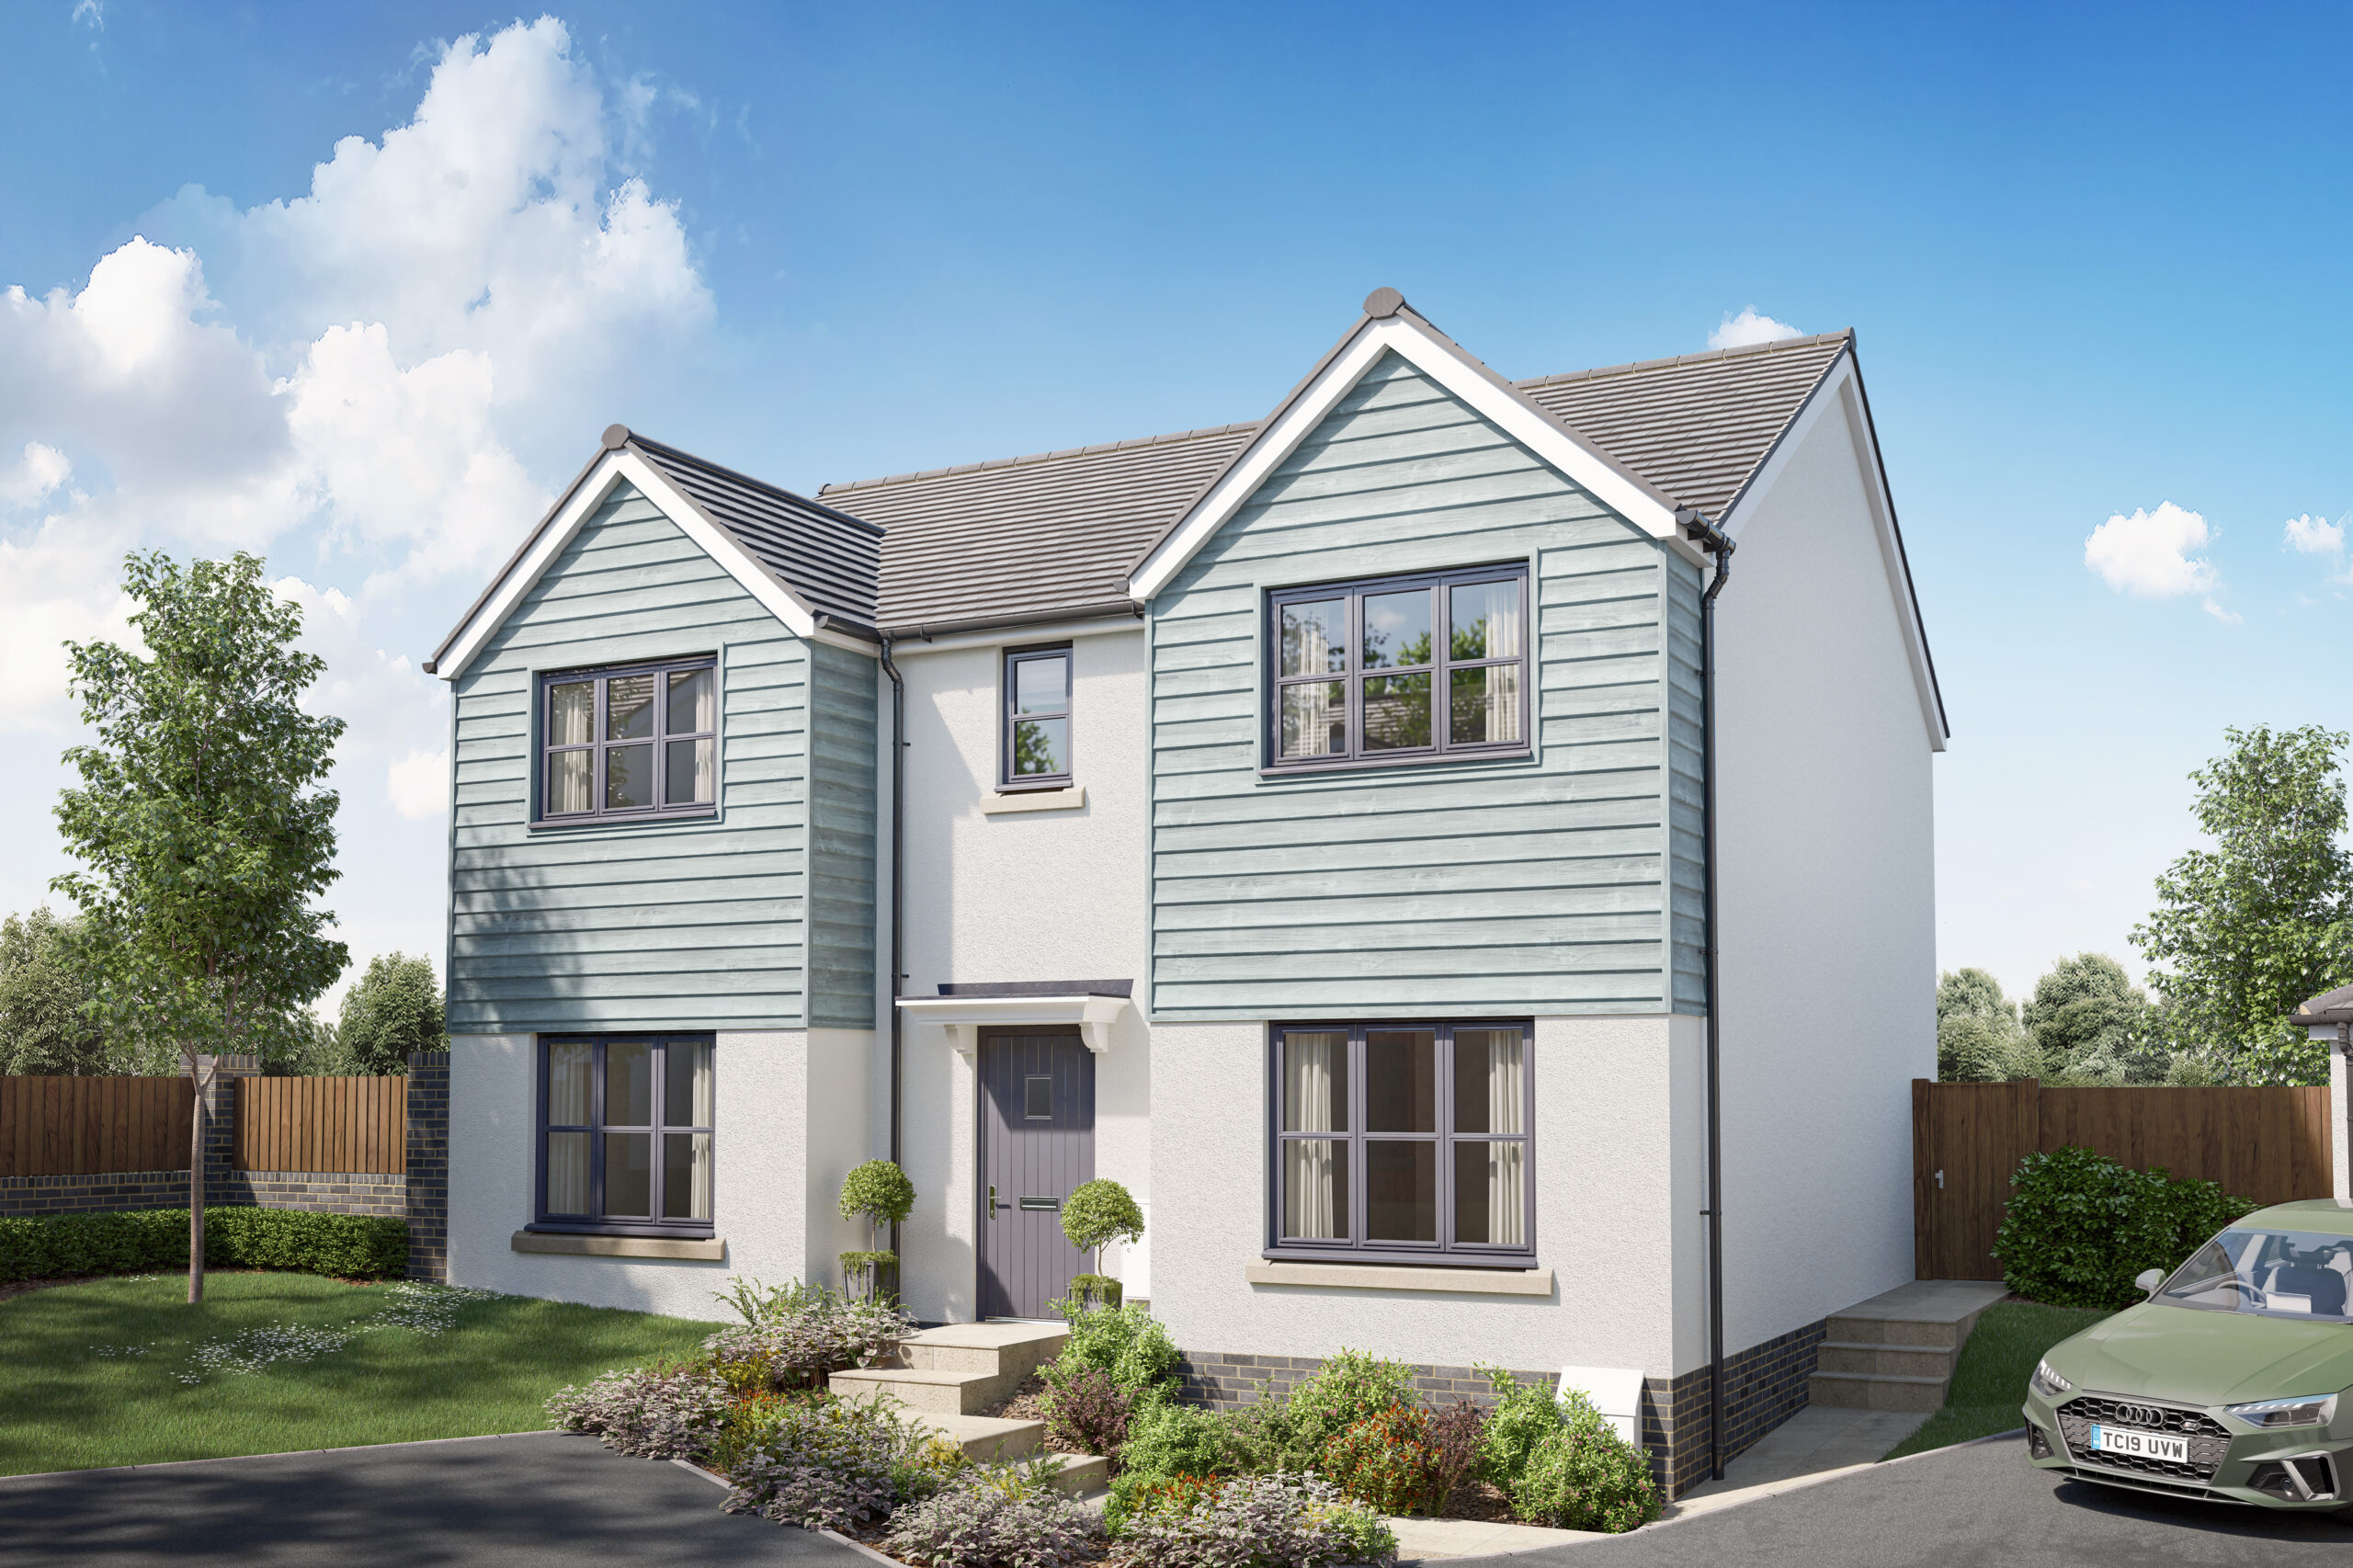 Property 1 of 9. The Wisteria | New Builds North Devon | Allison Homes